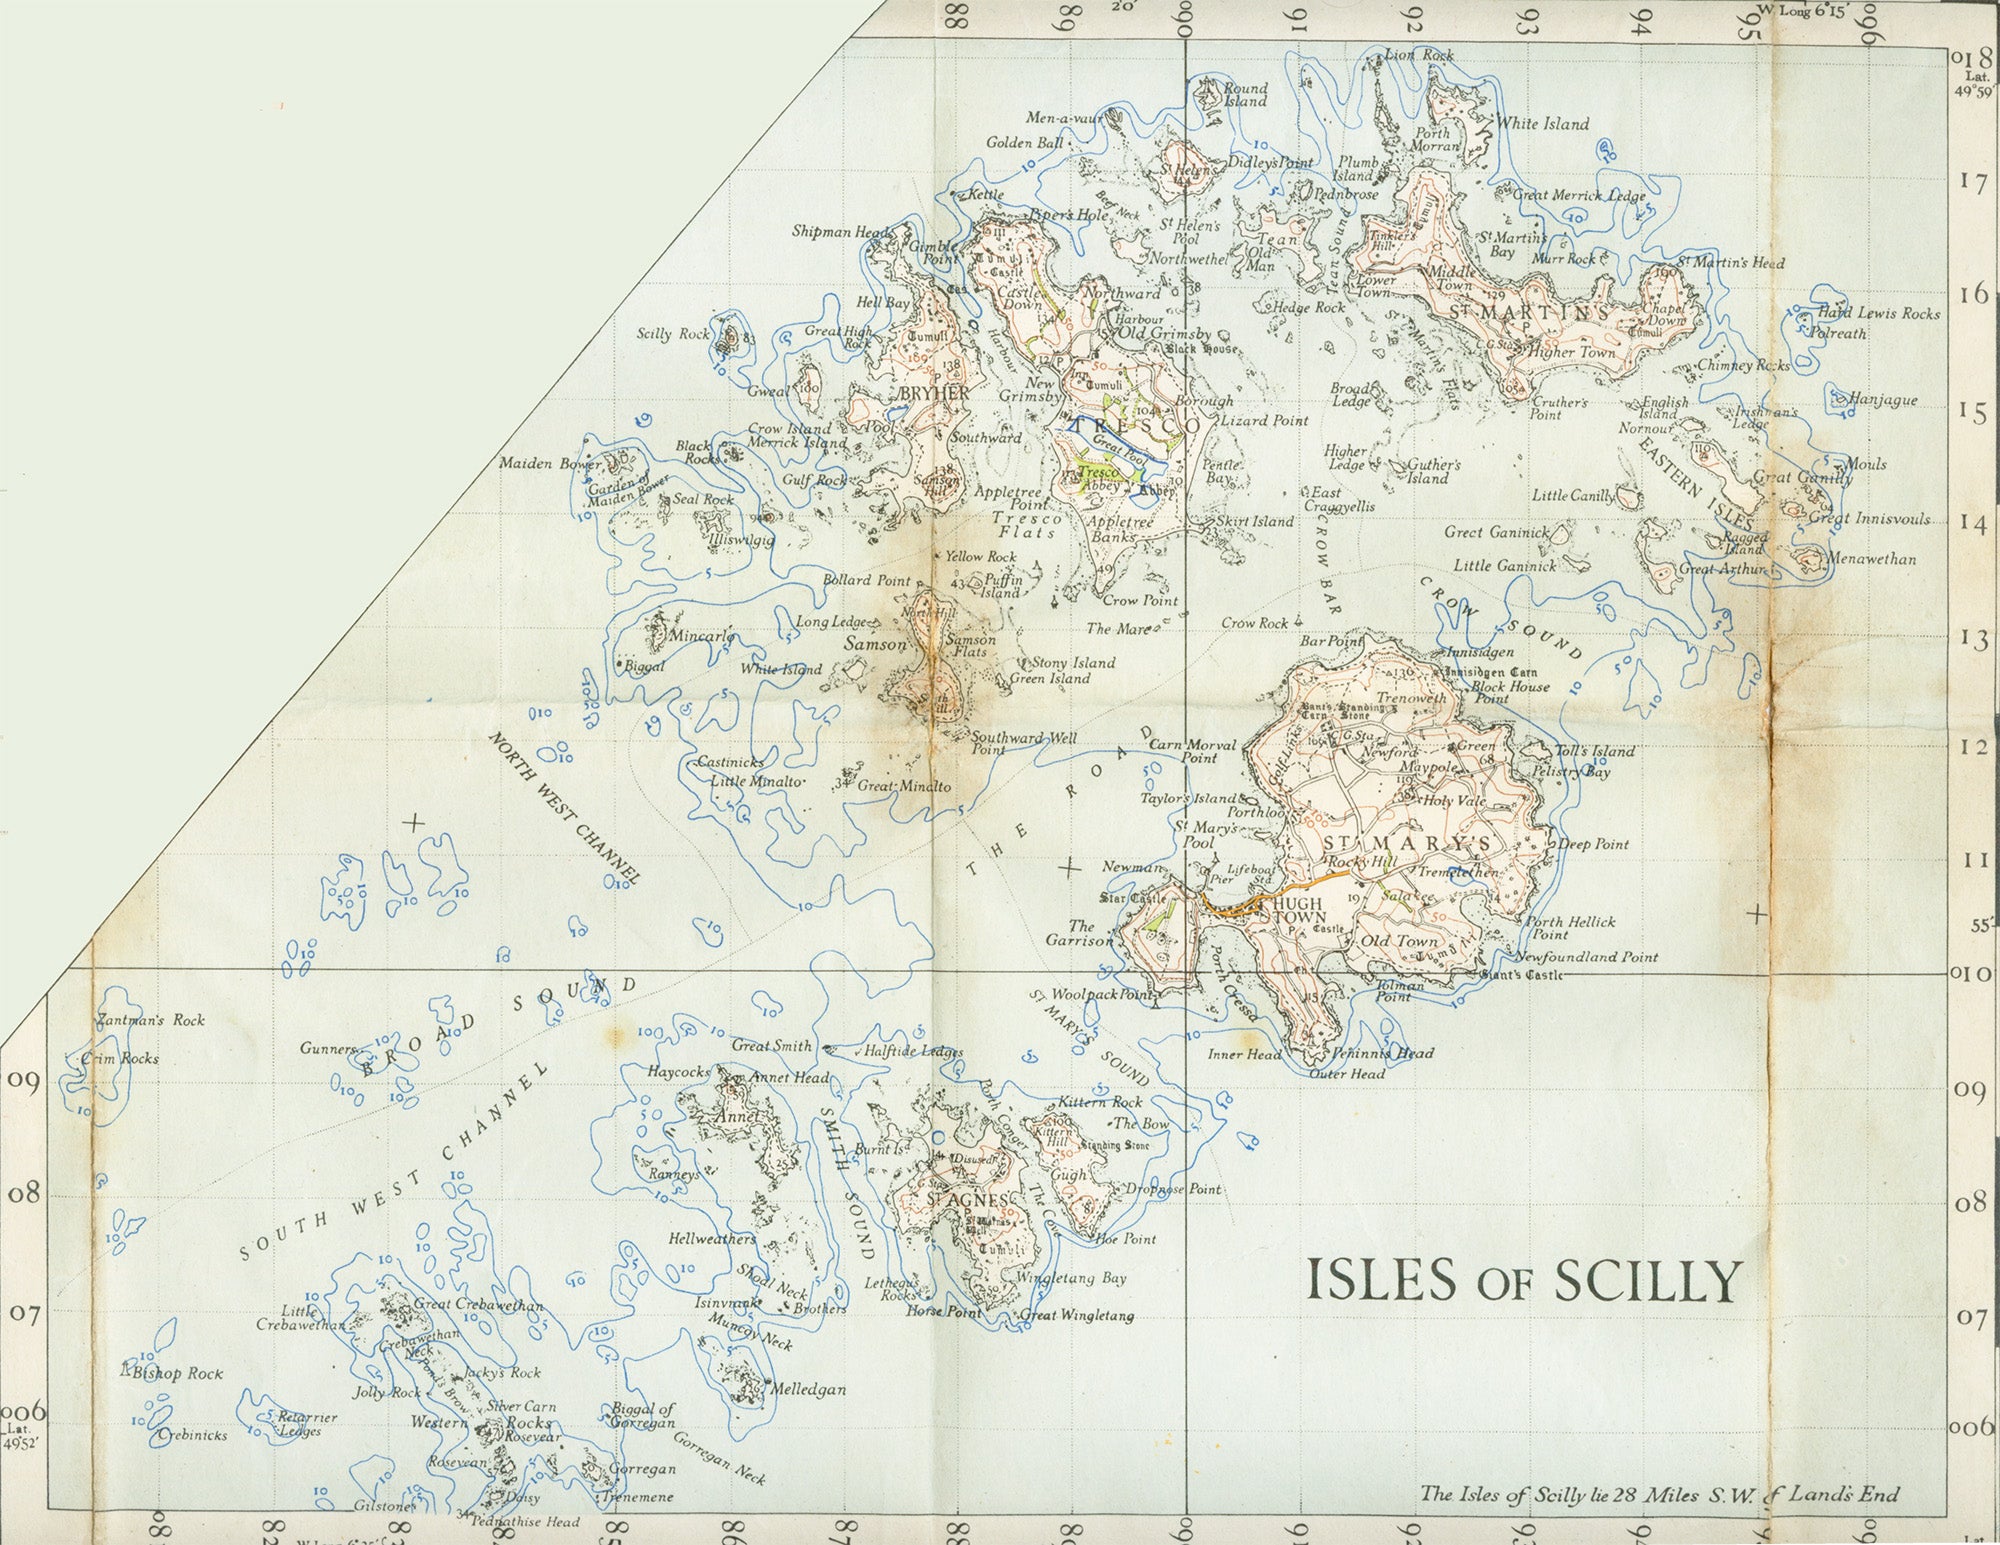 A map of the Isles of Scilly, 1946